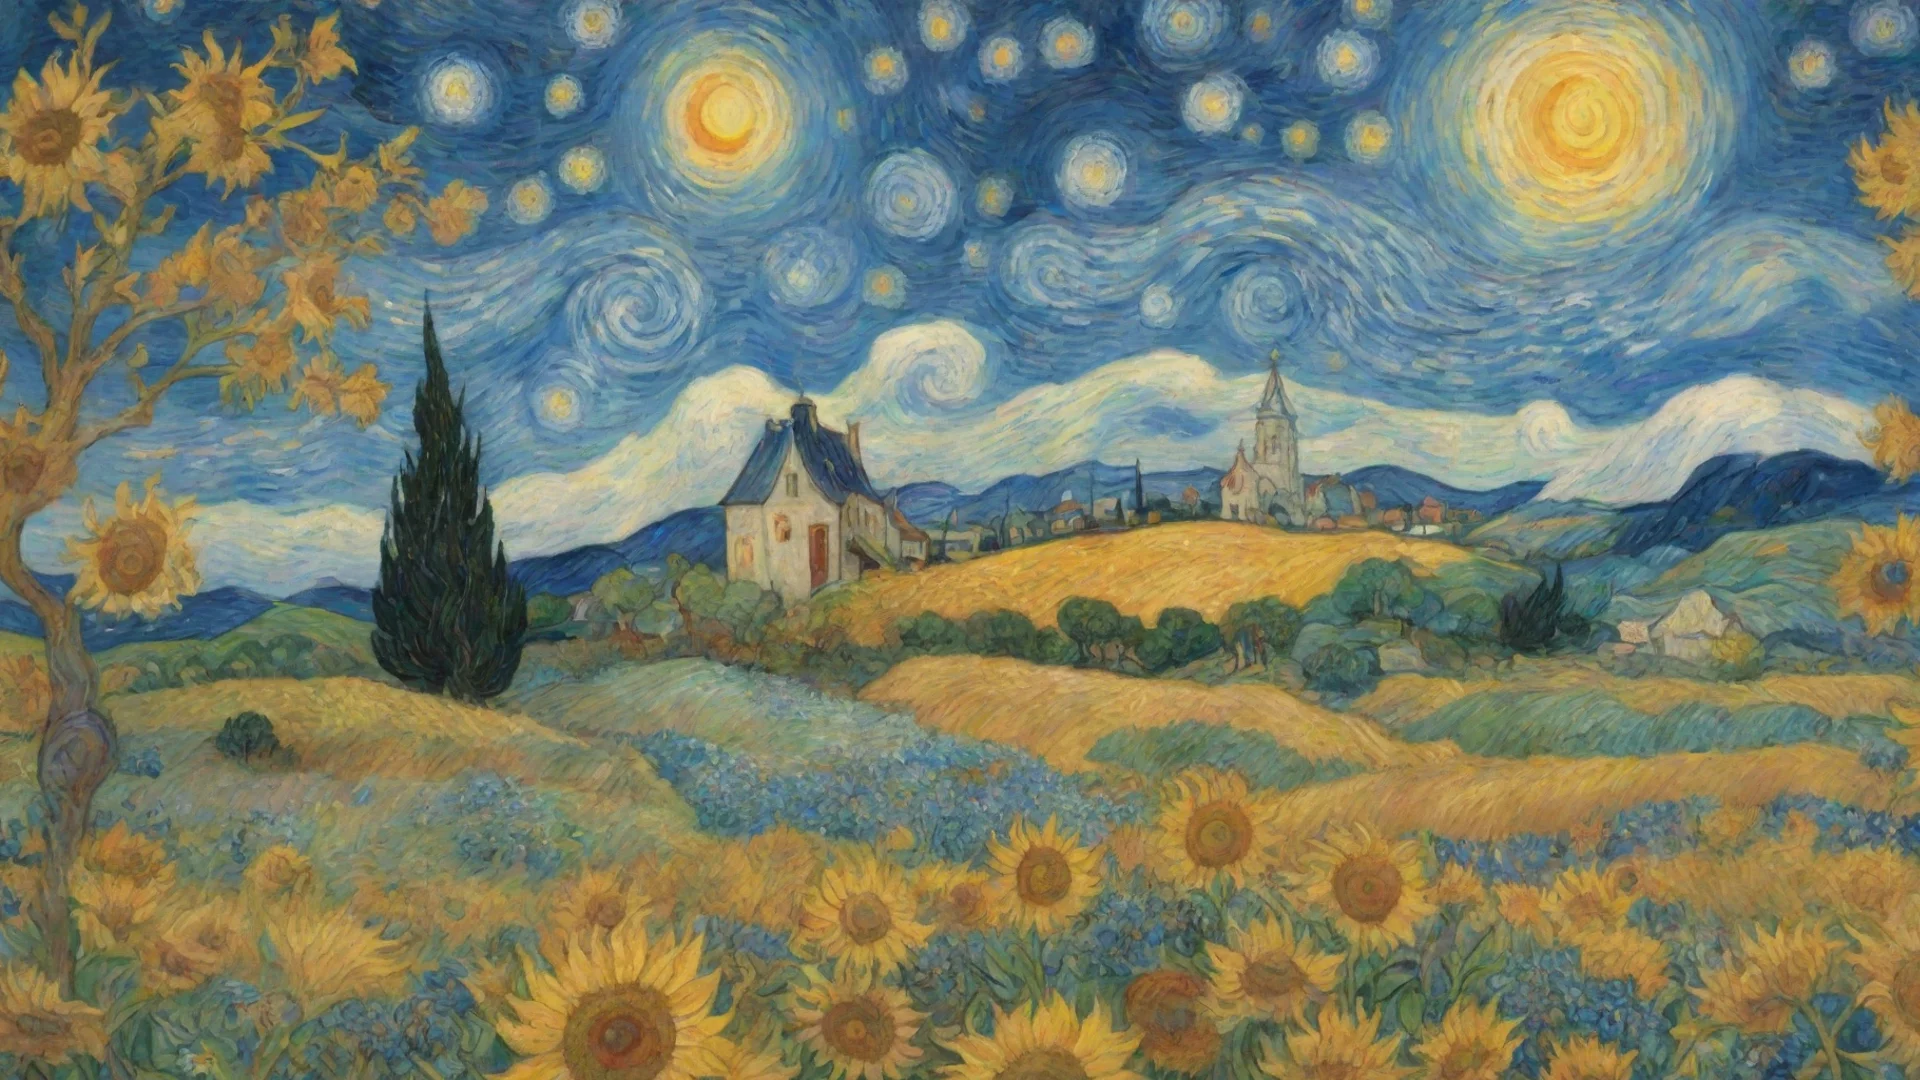 amazing epic lovely artistic ghibli van gogh happyness bliss peace  detailed asthetic awesome portrait 2 wide